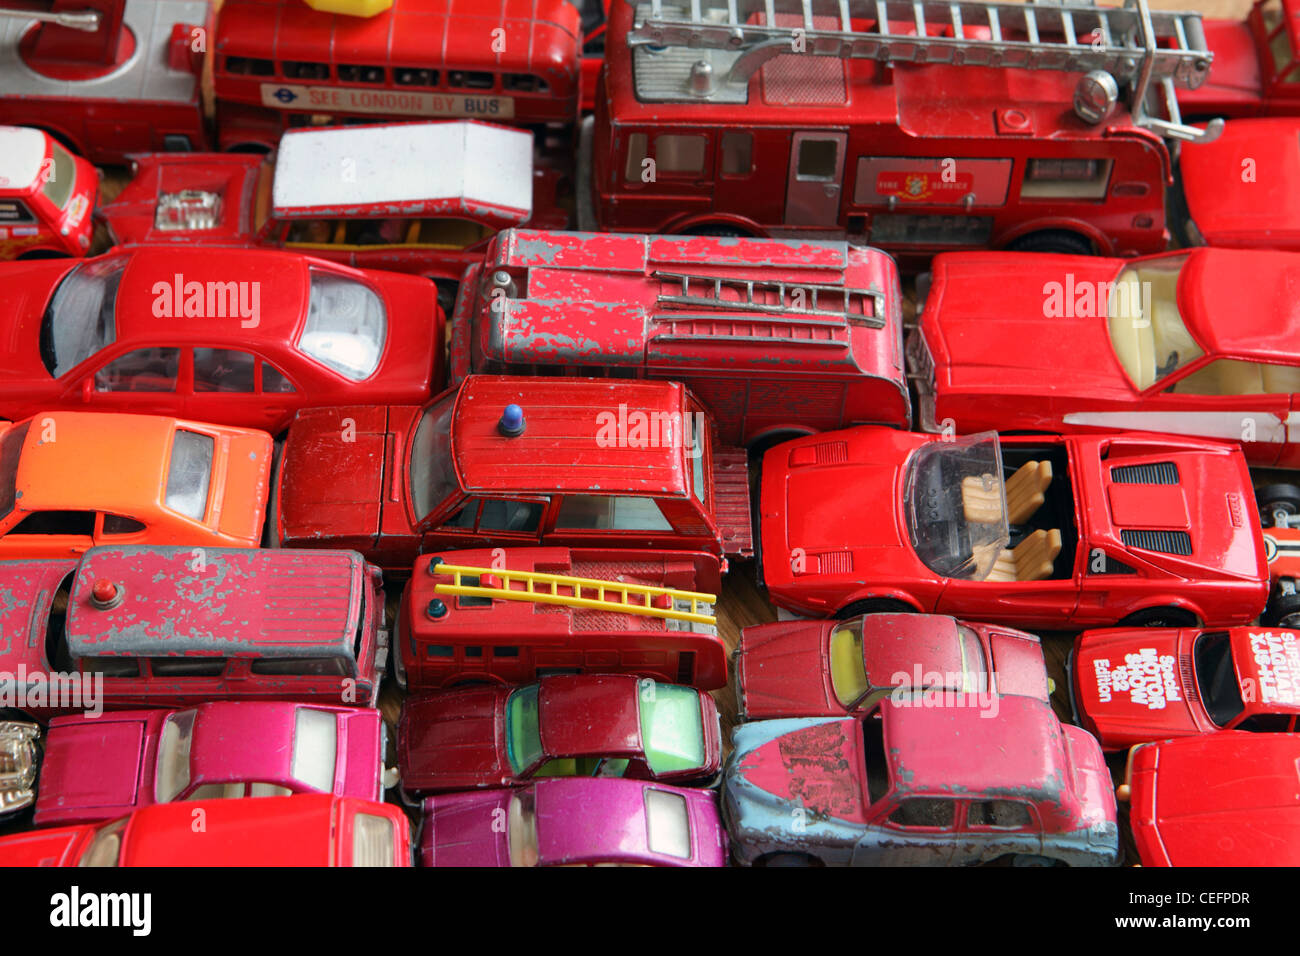 traffic jam of red model cars, all different shades of red, home studio, UK Stock Photo